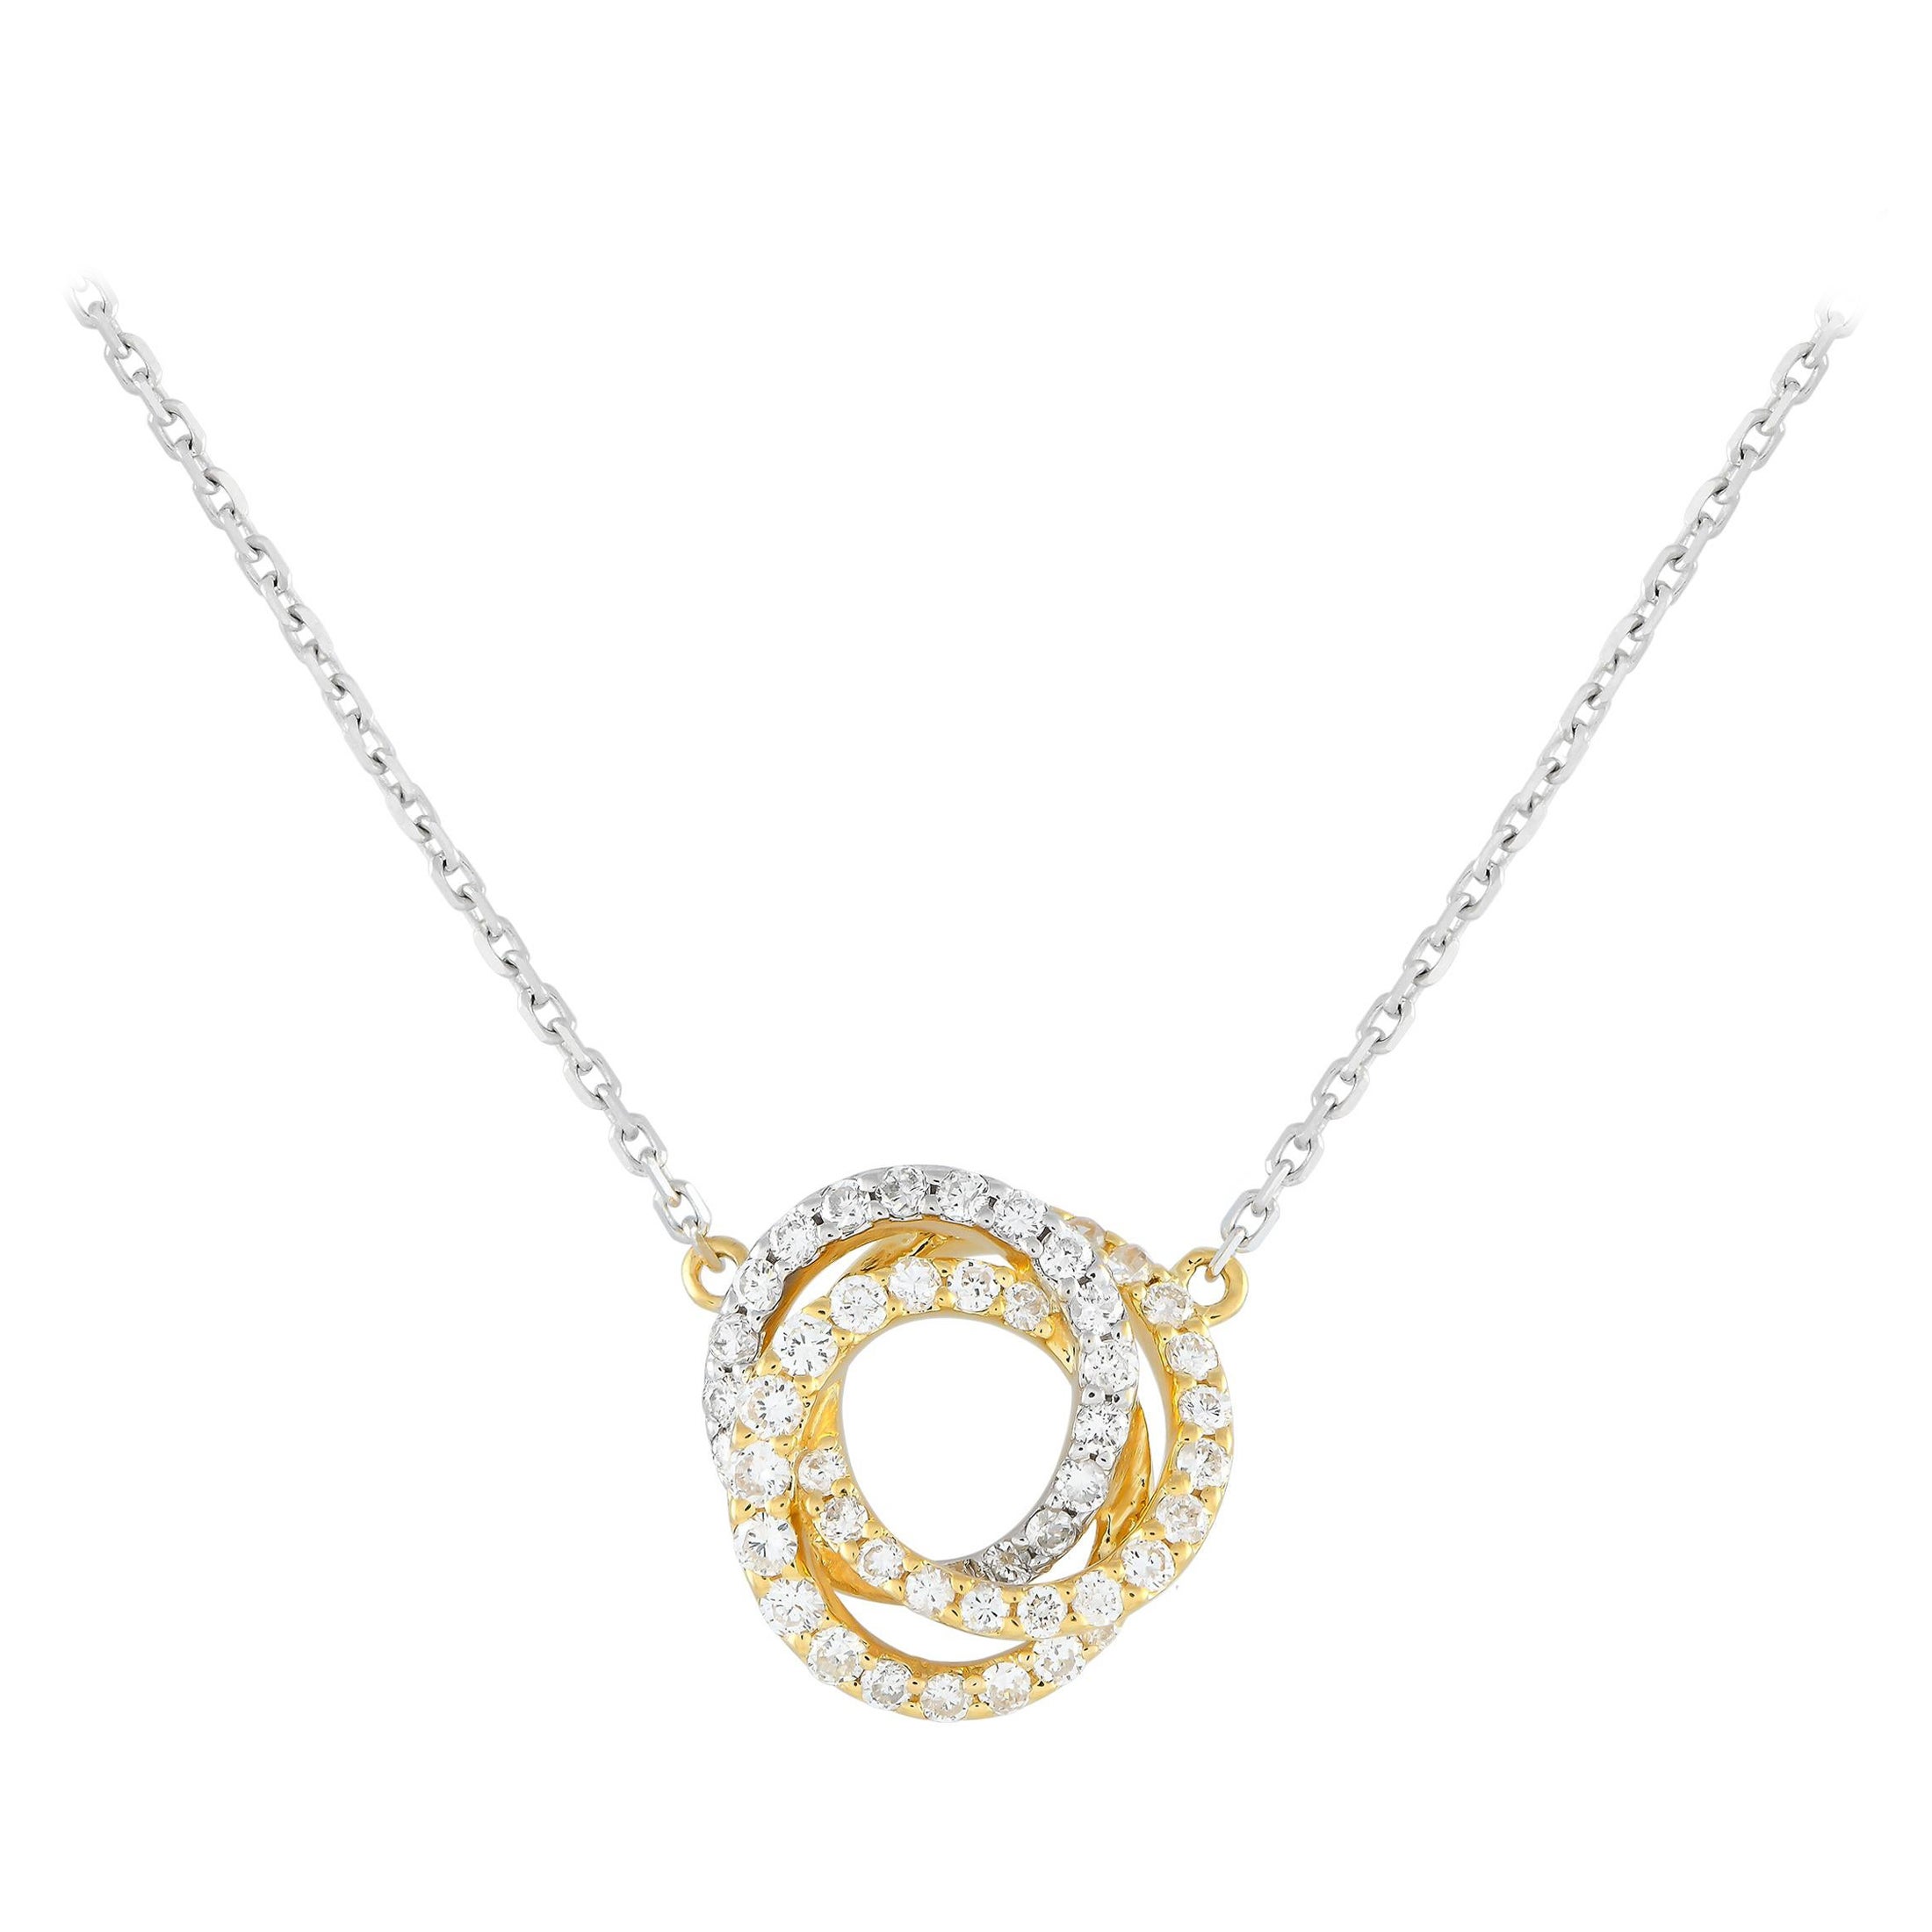 18K White and Yellow Gold 0.50ct Diamond Triple Ring Necklace ANK-13200WY